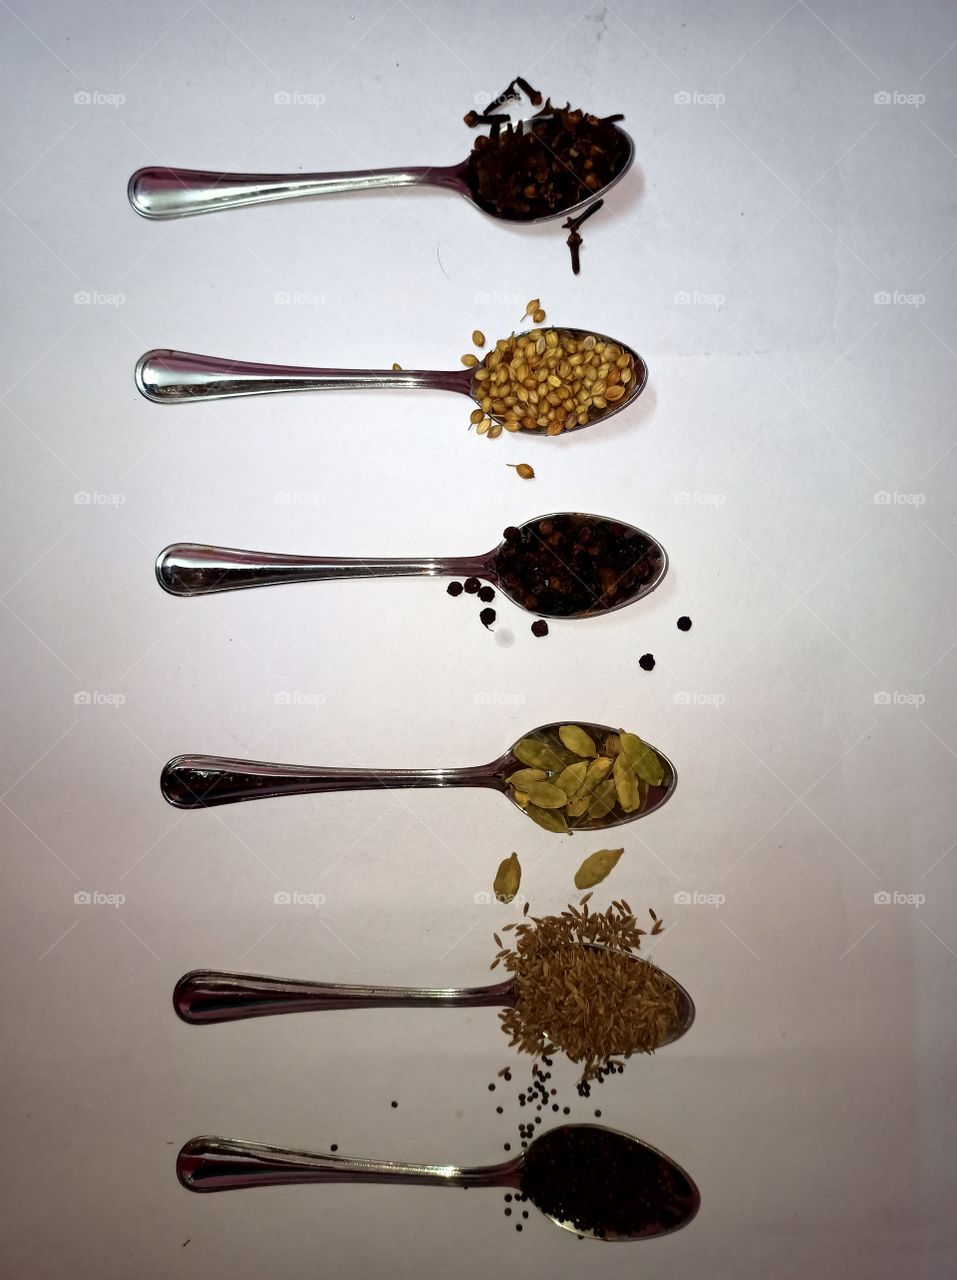 spices arranged in a order, bird's eye view,
with it's texture, colour and Aroma